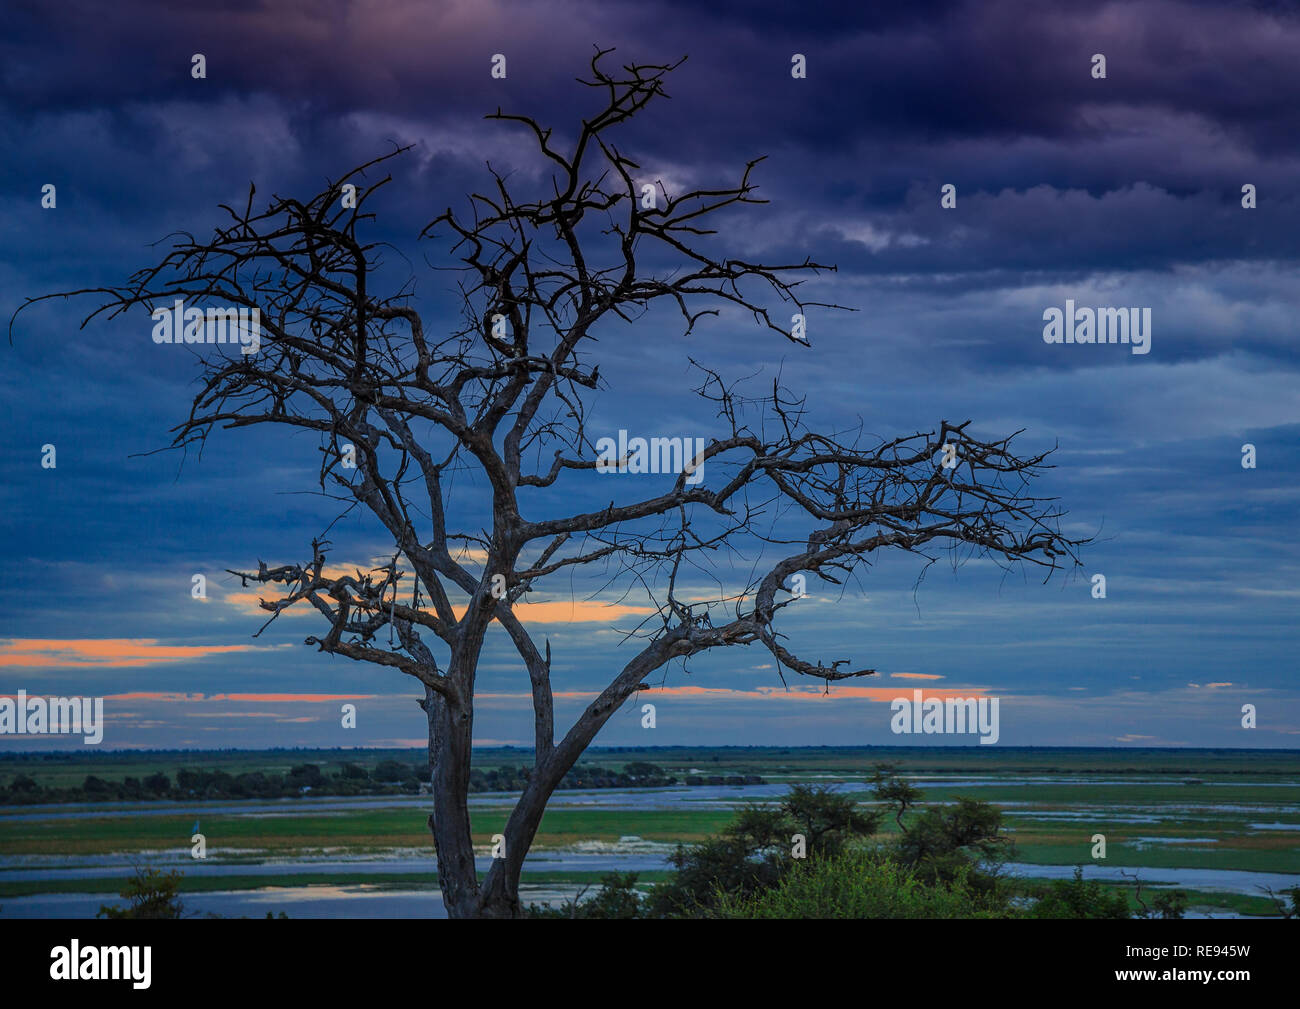 Landscape picture of the Chobe River at the Chobe National Park in Botsuana during summer Stock Photo